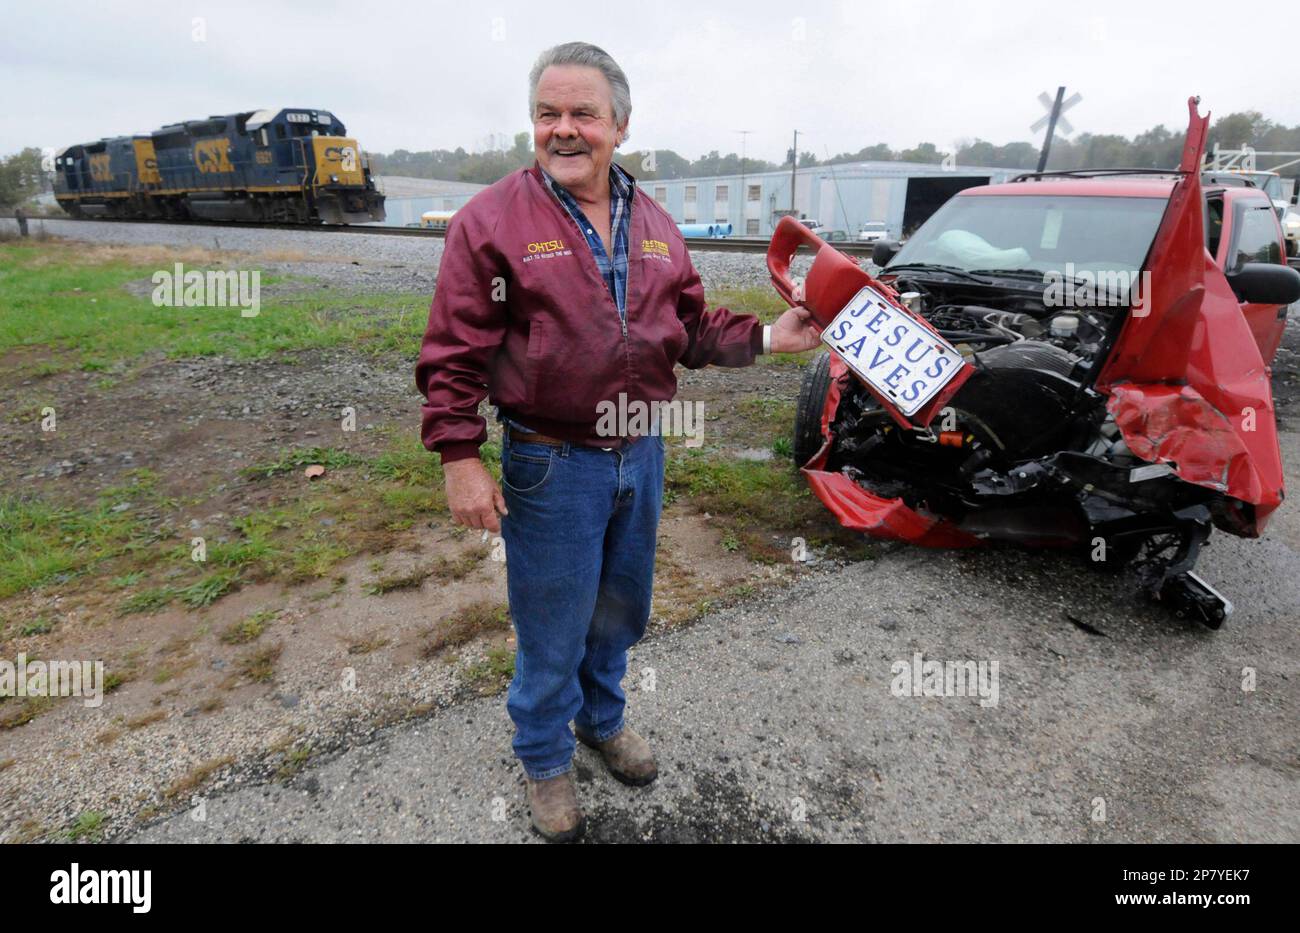 Steve Bumpus, of Hadley, Ky., looks at the "Jesus Saves" license plate he found 25 yards from his SUV after he survived a collision with a train Friday, Oct. 16, 2009, at Tobacco Road in Bowling Green, Ky. Bumpus, who was uninjured, said he did not see the train coming. "I really was saved," said Bumpus of his ordeal.(AP Photo/Daily News, Joe Imel) Stock Photo